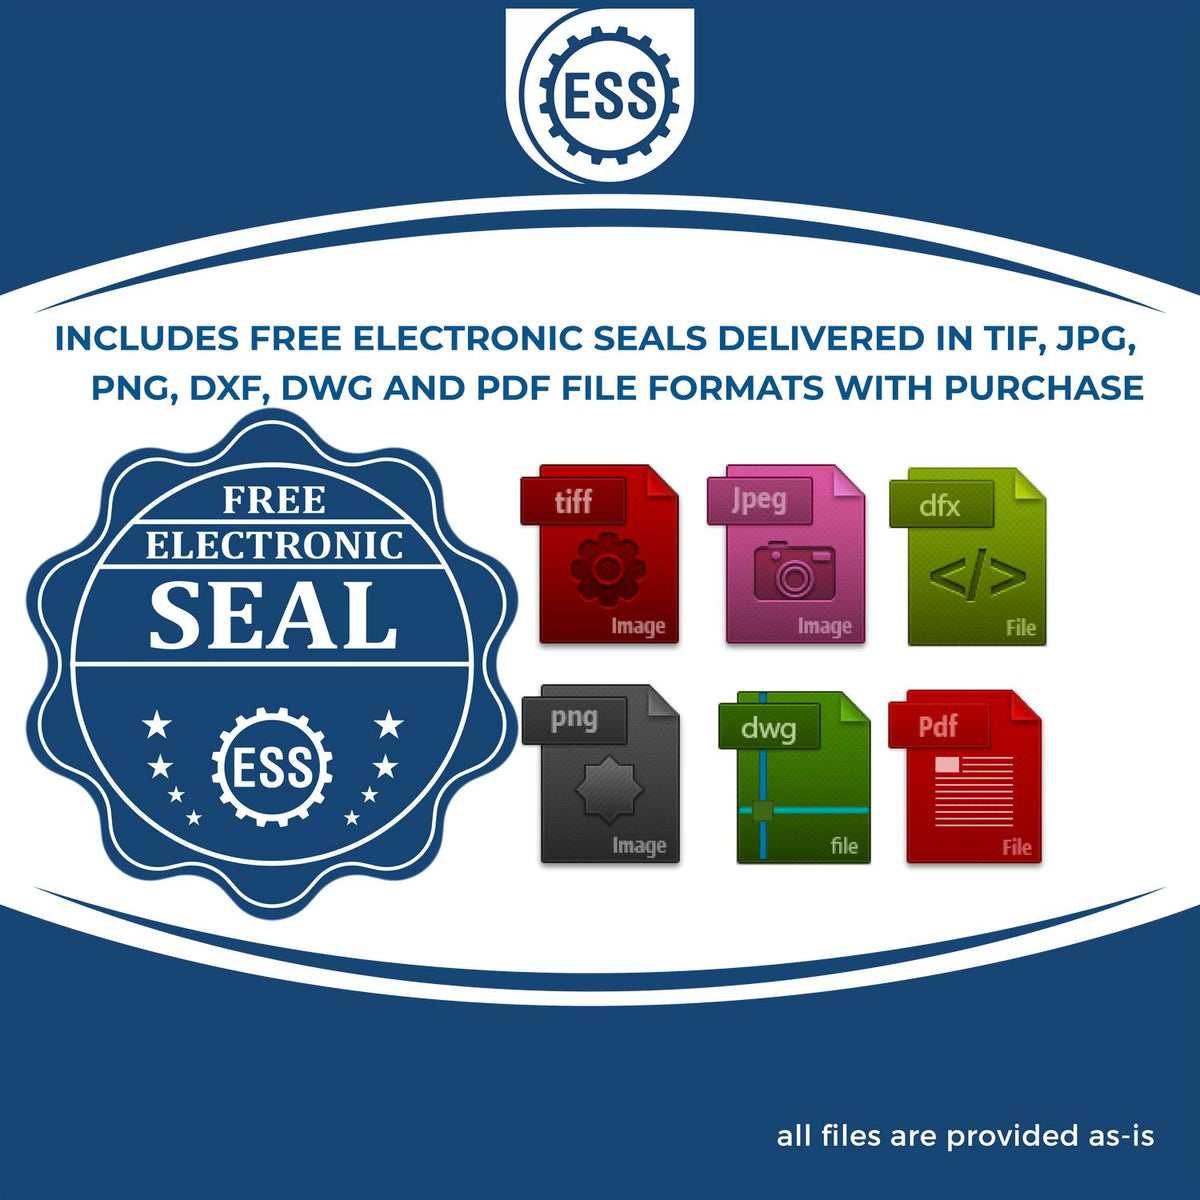 An infographic for the free electronic seal for the Hybrid District of Columbia Engineer Seal illustrating the different file type icons such as DXF, DWG, TIF, JPG and PNG.